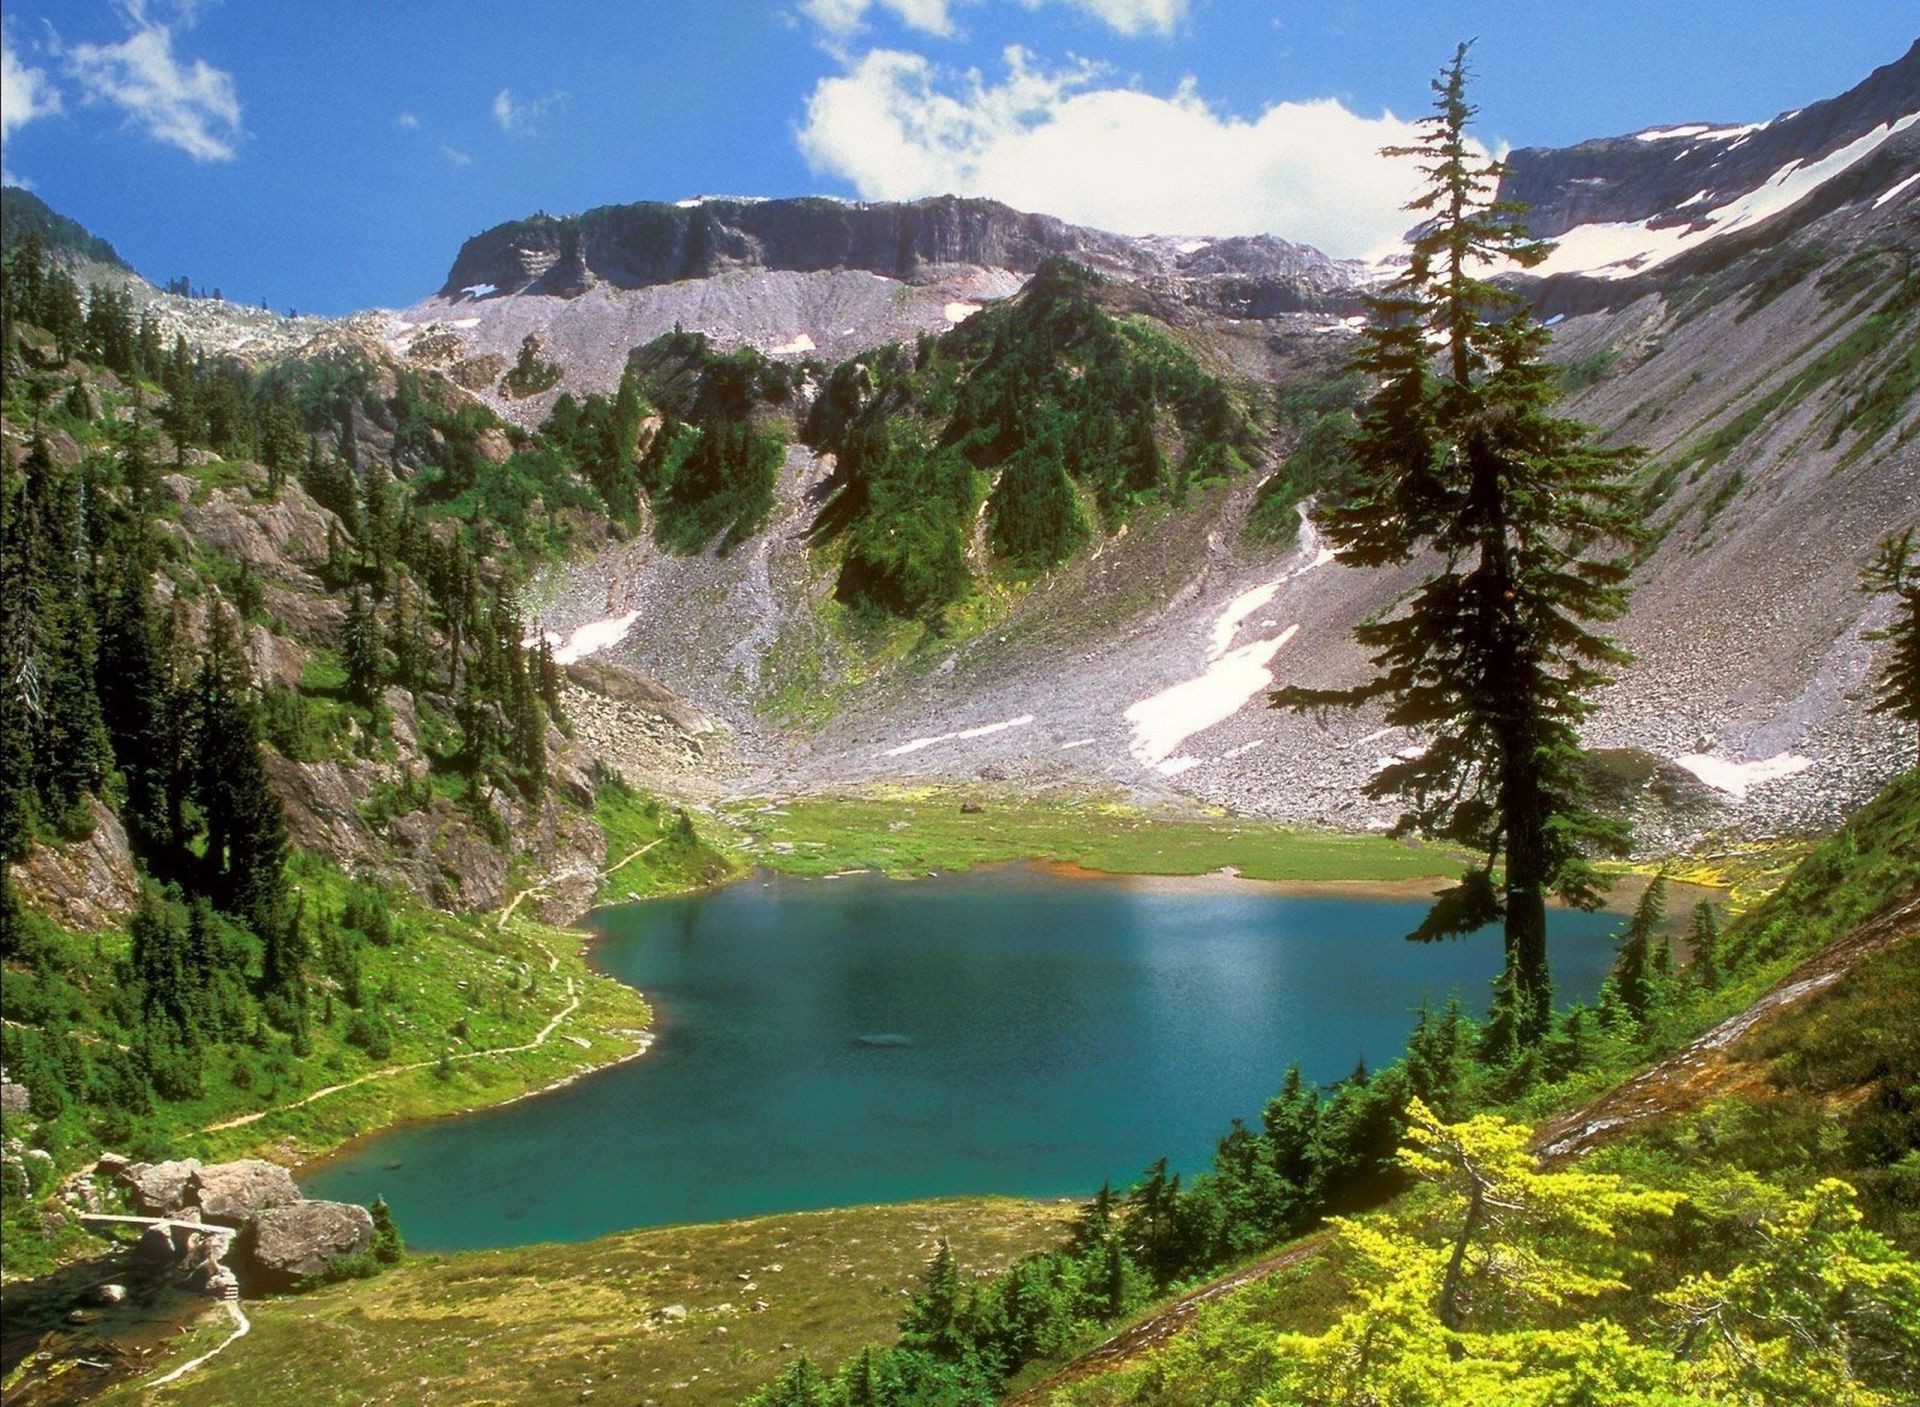 mountains water mountain nature landscape travel wood outdoors scenic lake river sky valley rock tree hike summer snow